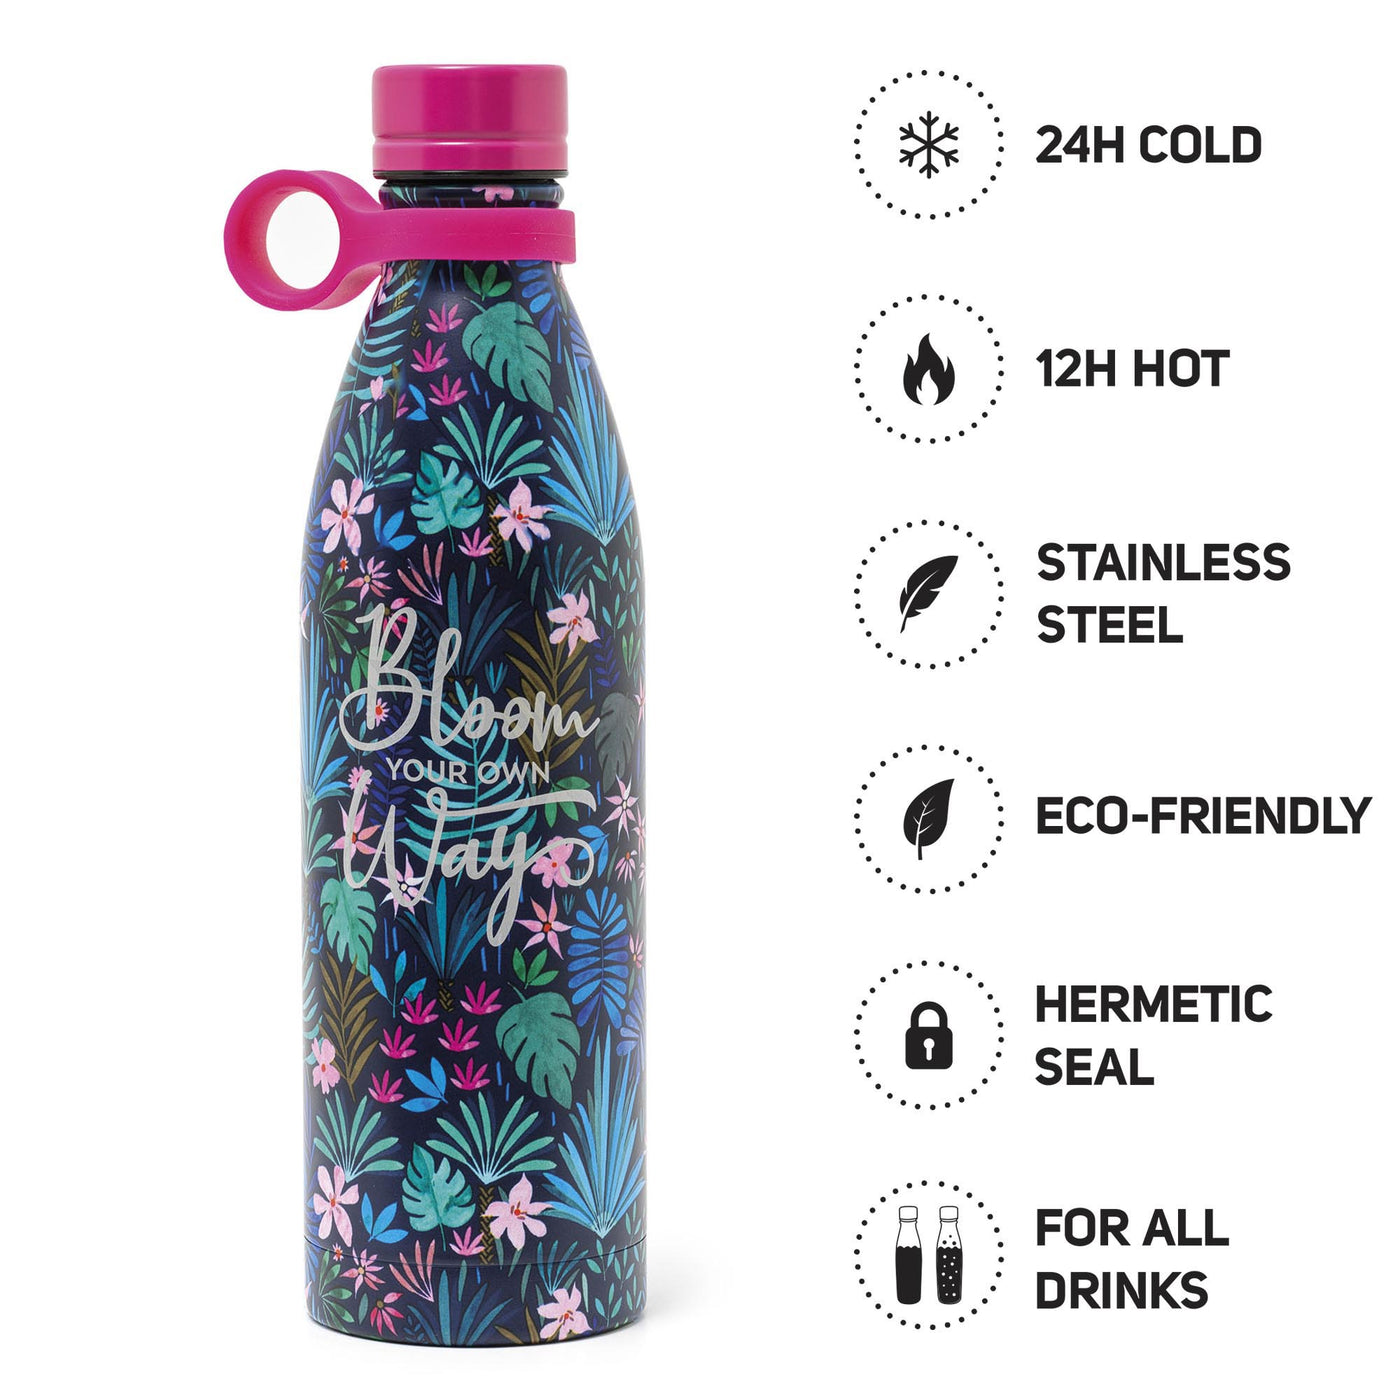 Legami Hot & Cold - 800 ml Vacuum Bottle Collection